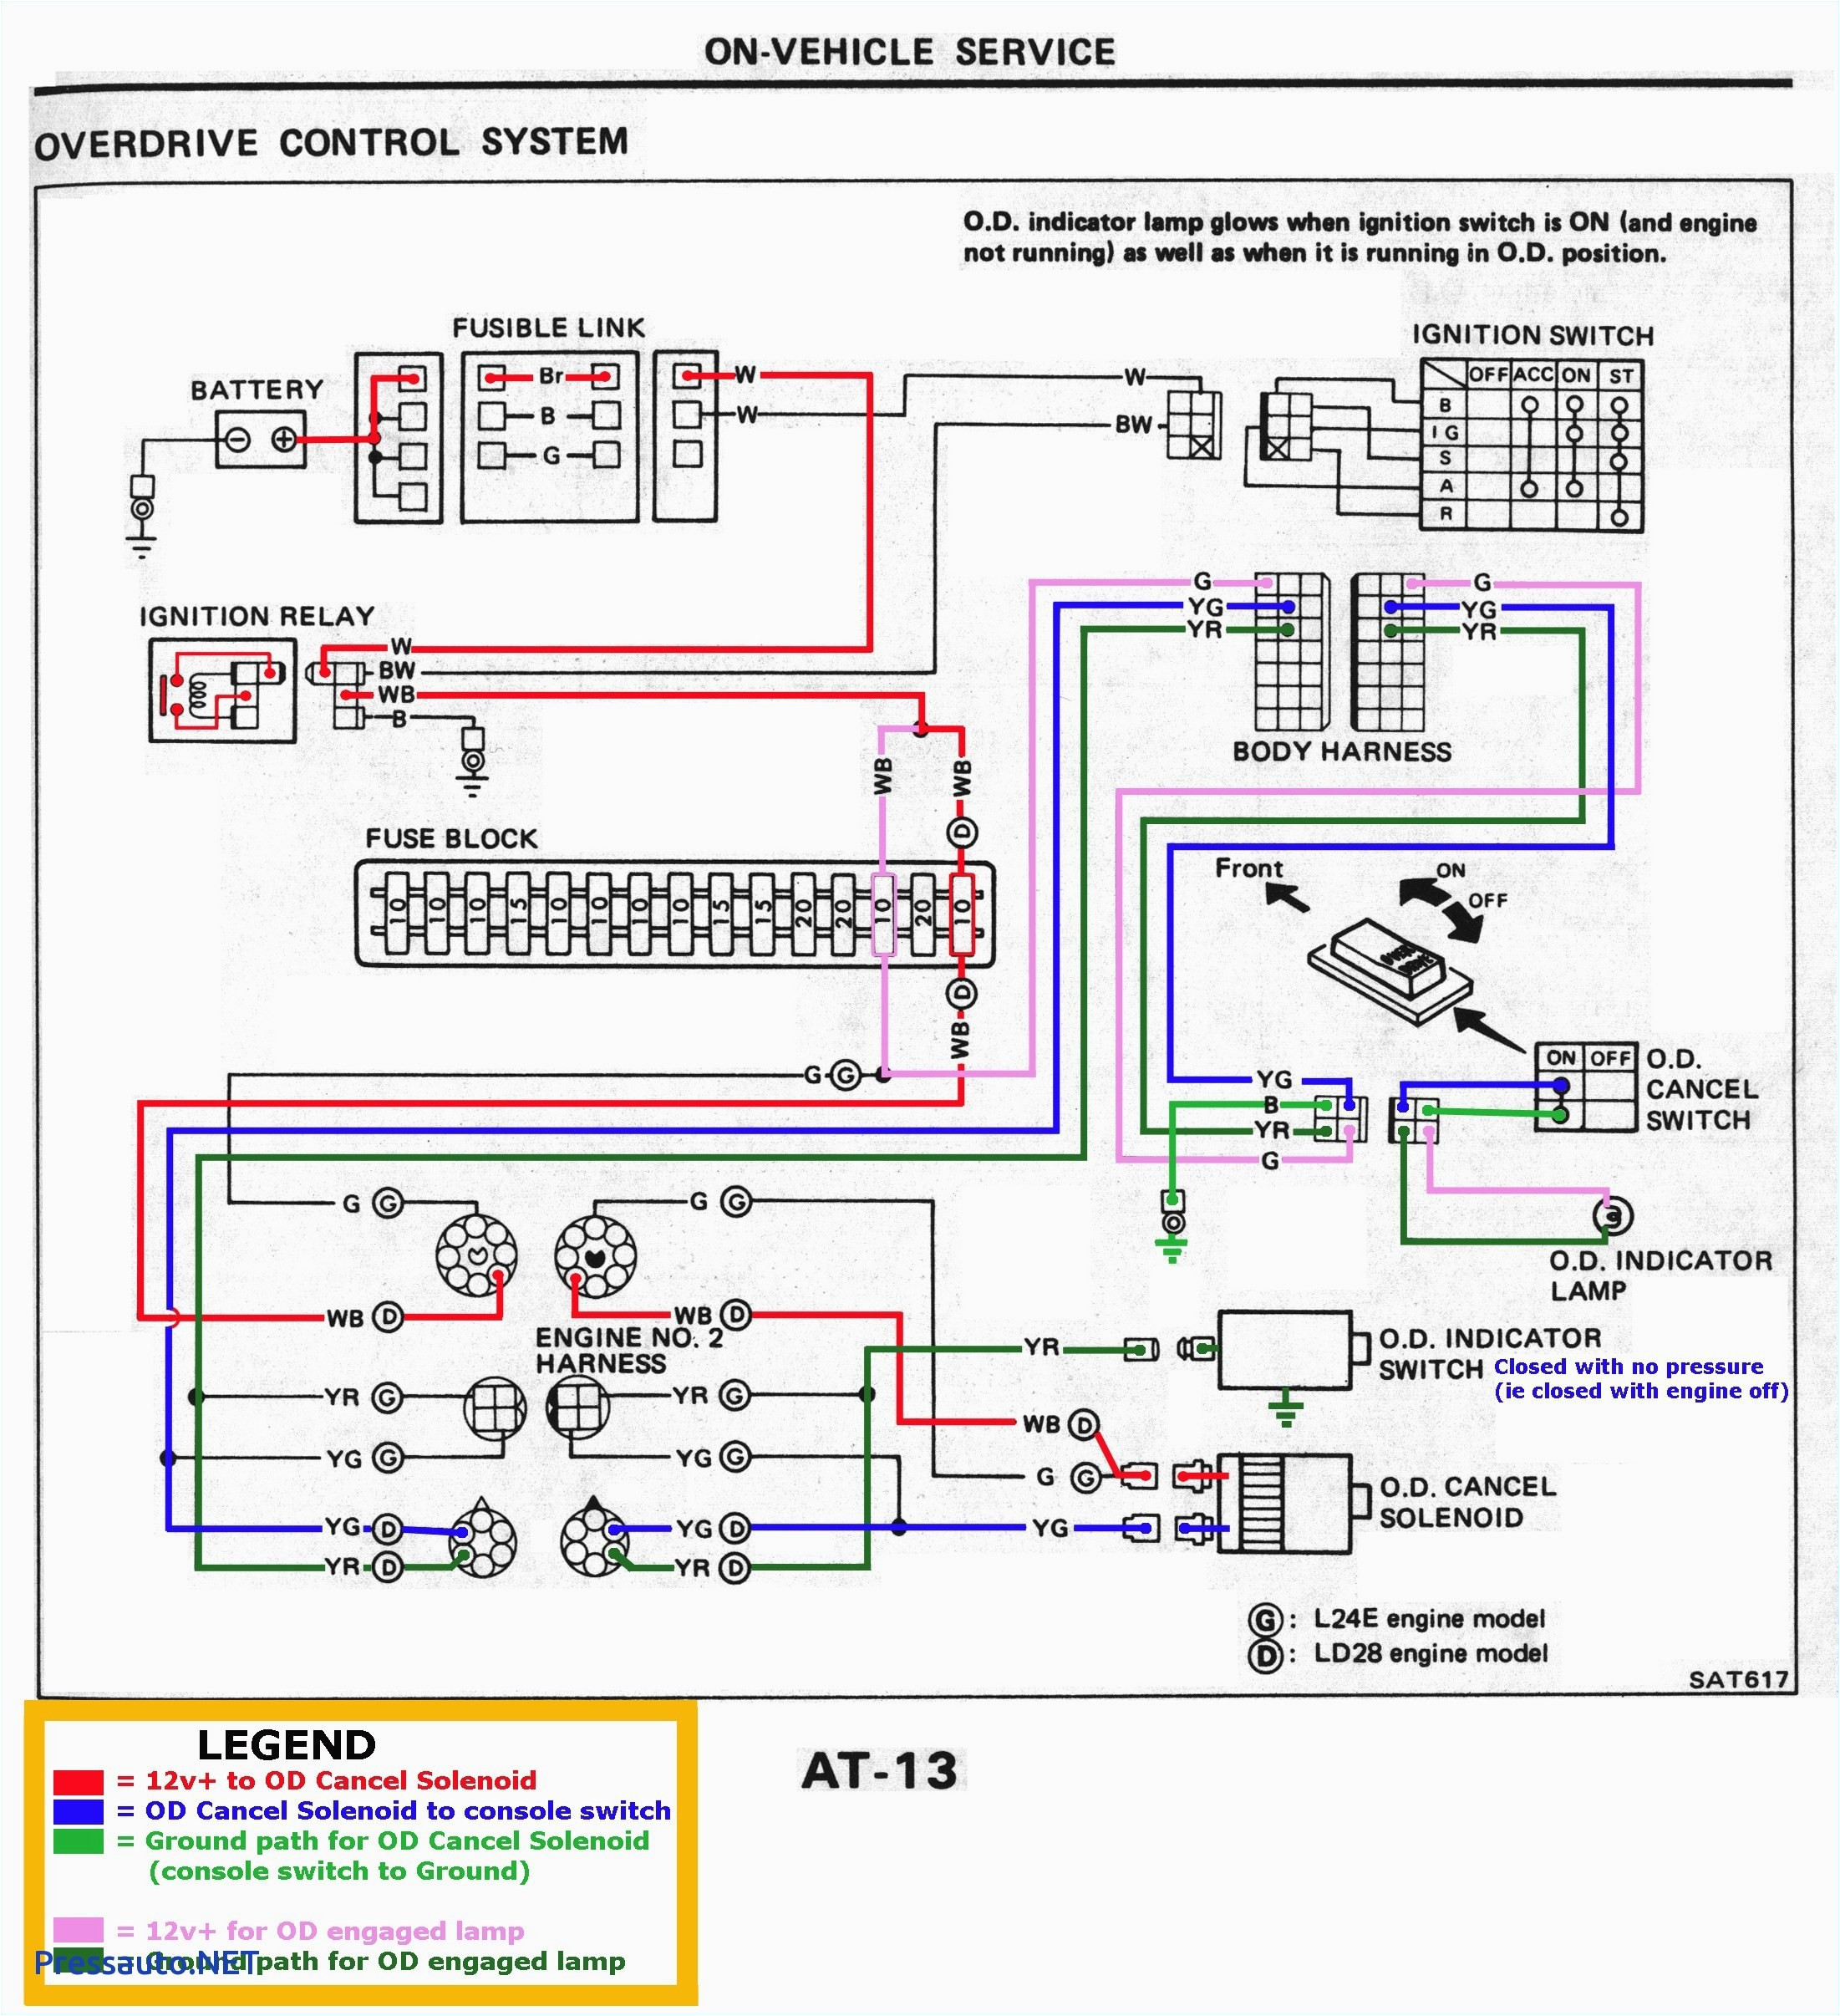 wiring diagram color codes elegant audi 80 radio harness color code 16 7 woodmarquetry e280a2 jpg